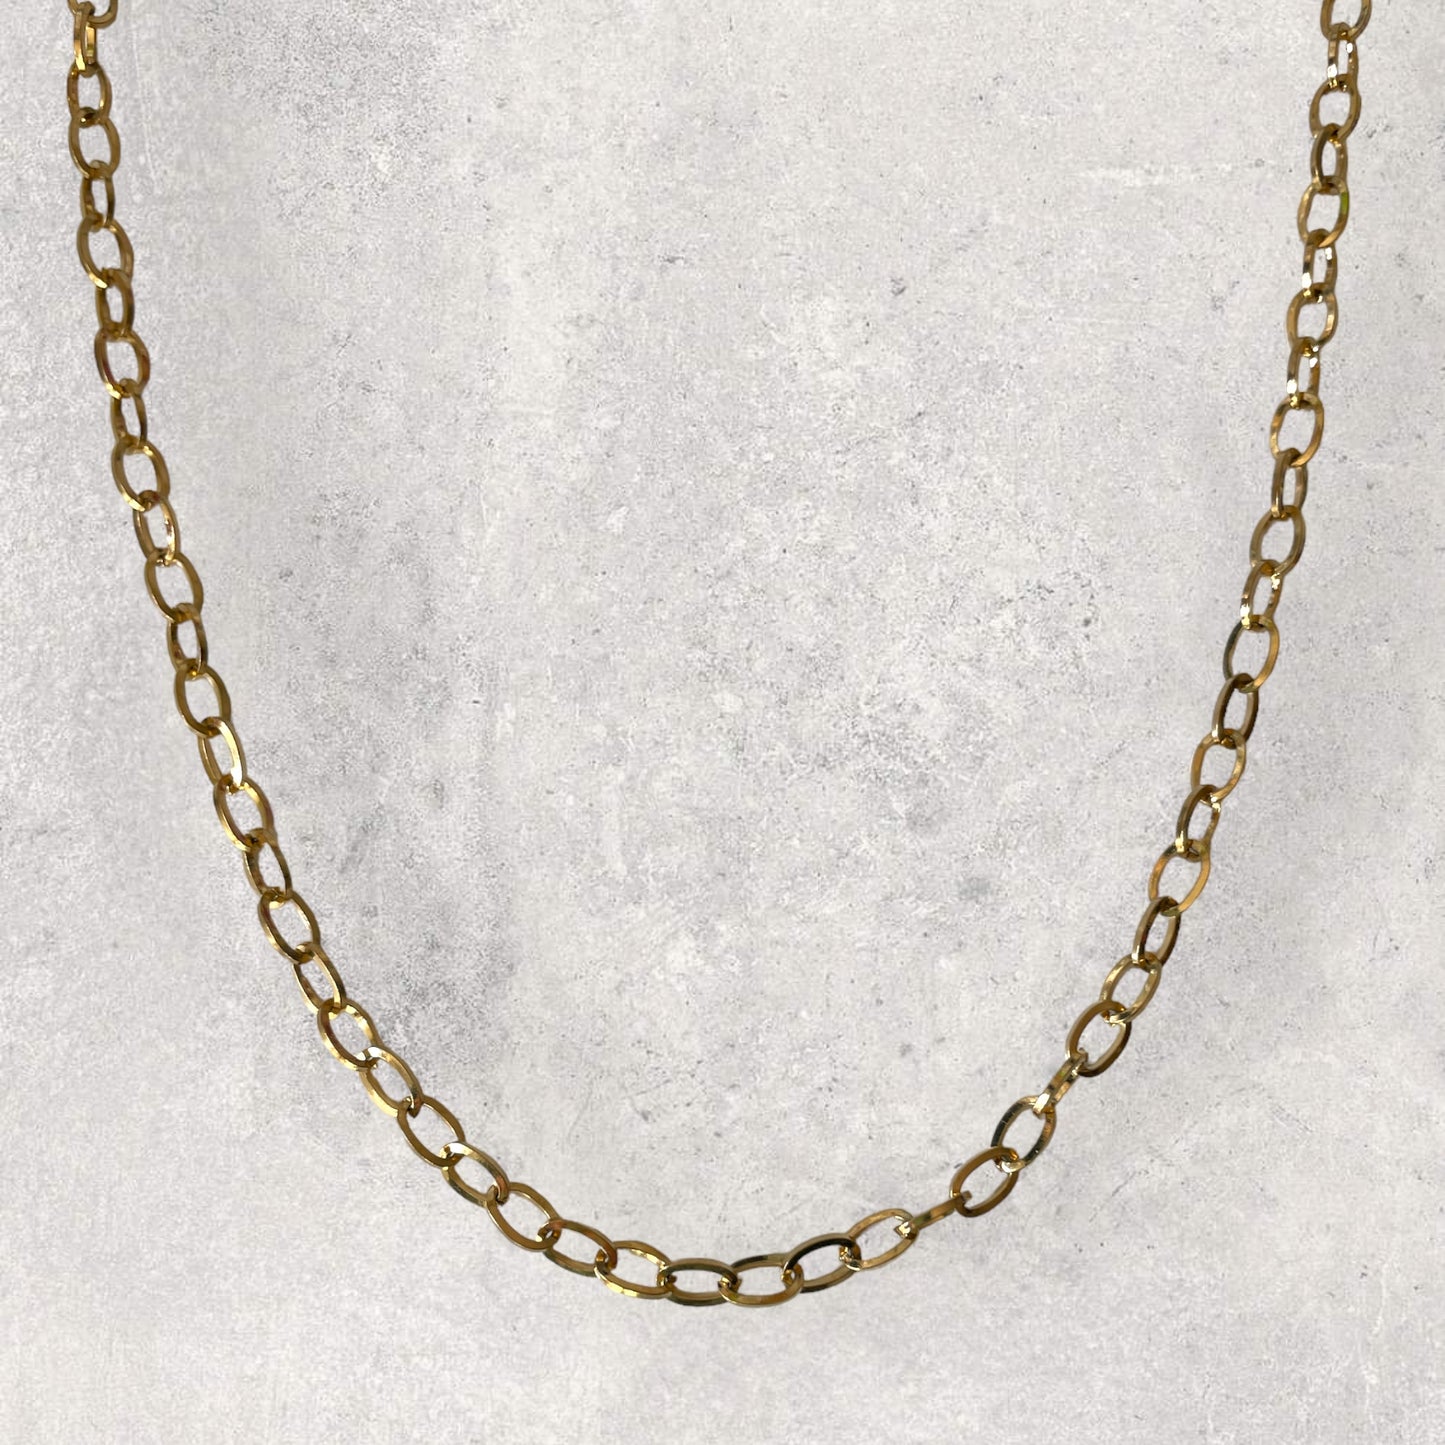 'COMBINED CHAIN' necklace DYO base